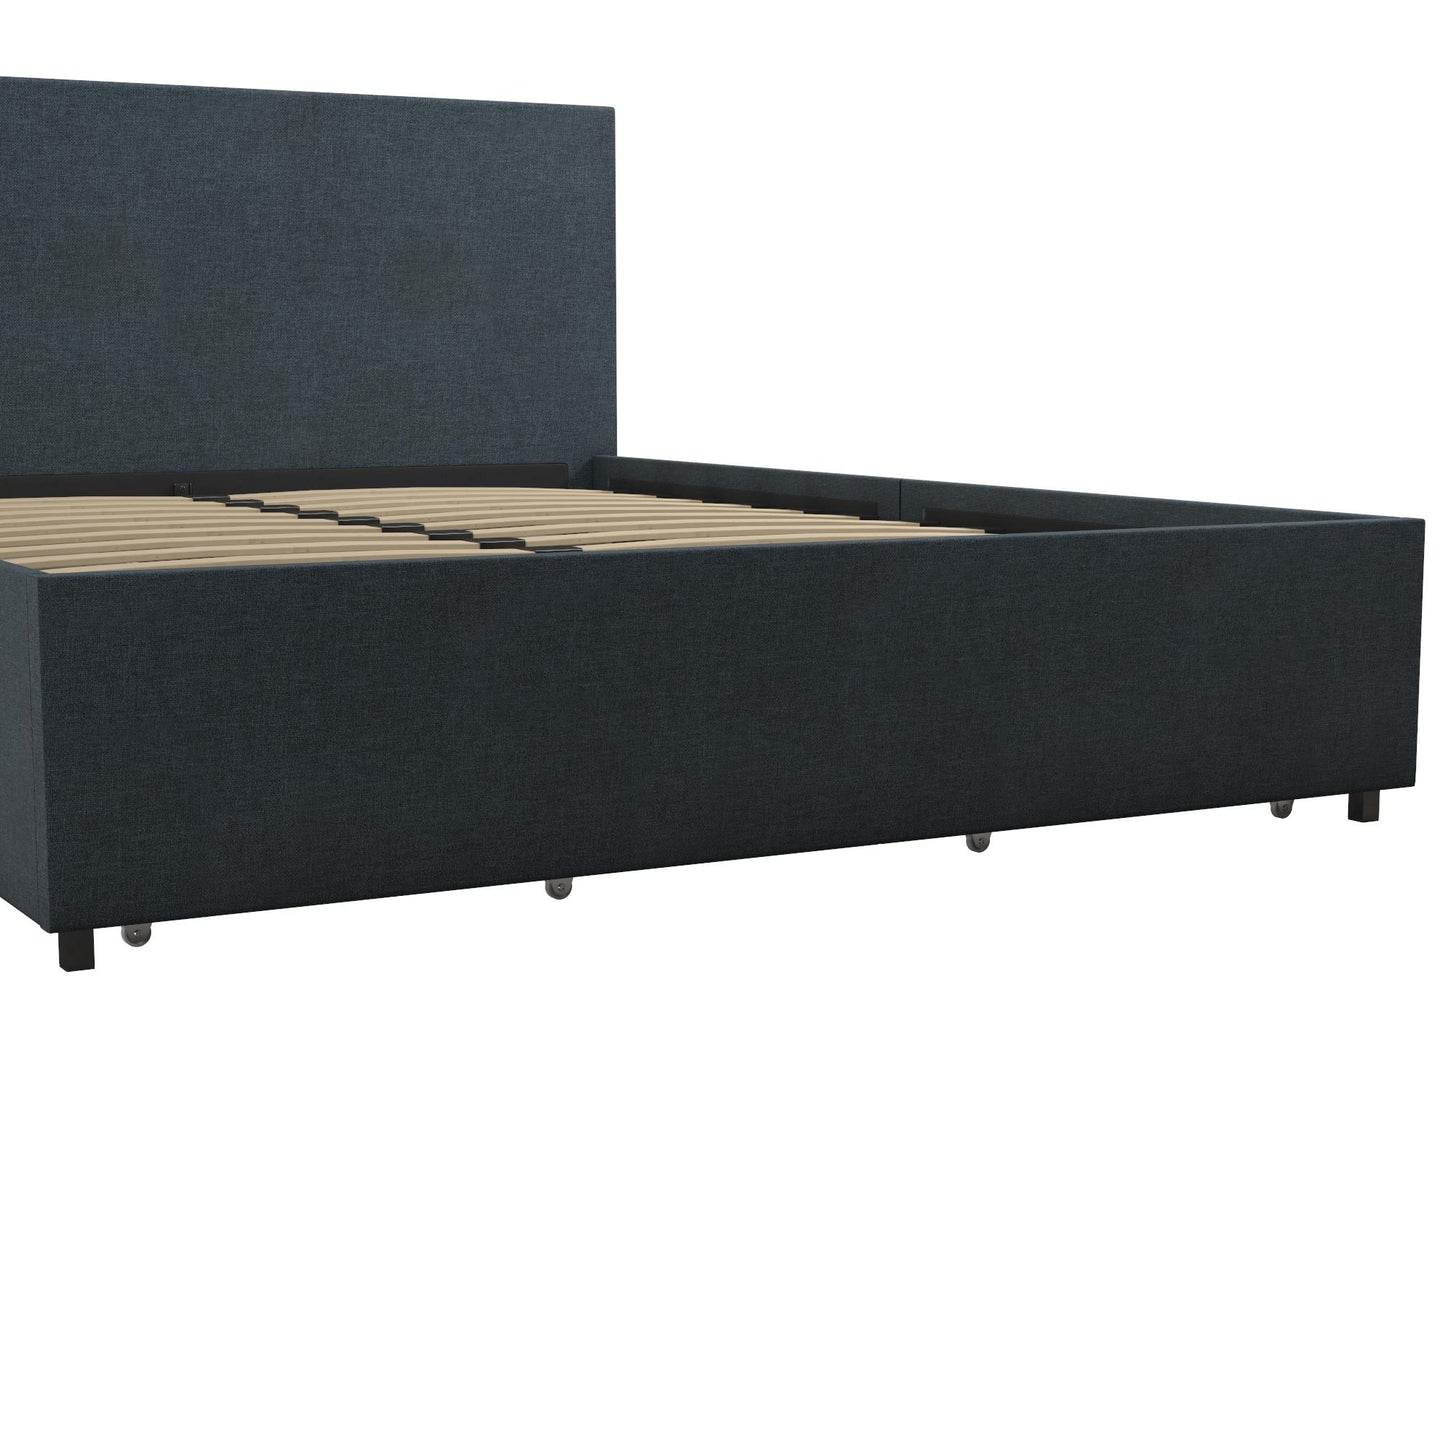 Kelly Upholstered Bed with Storage - Navy - Full